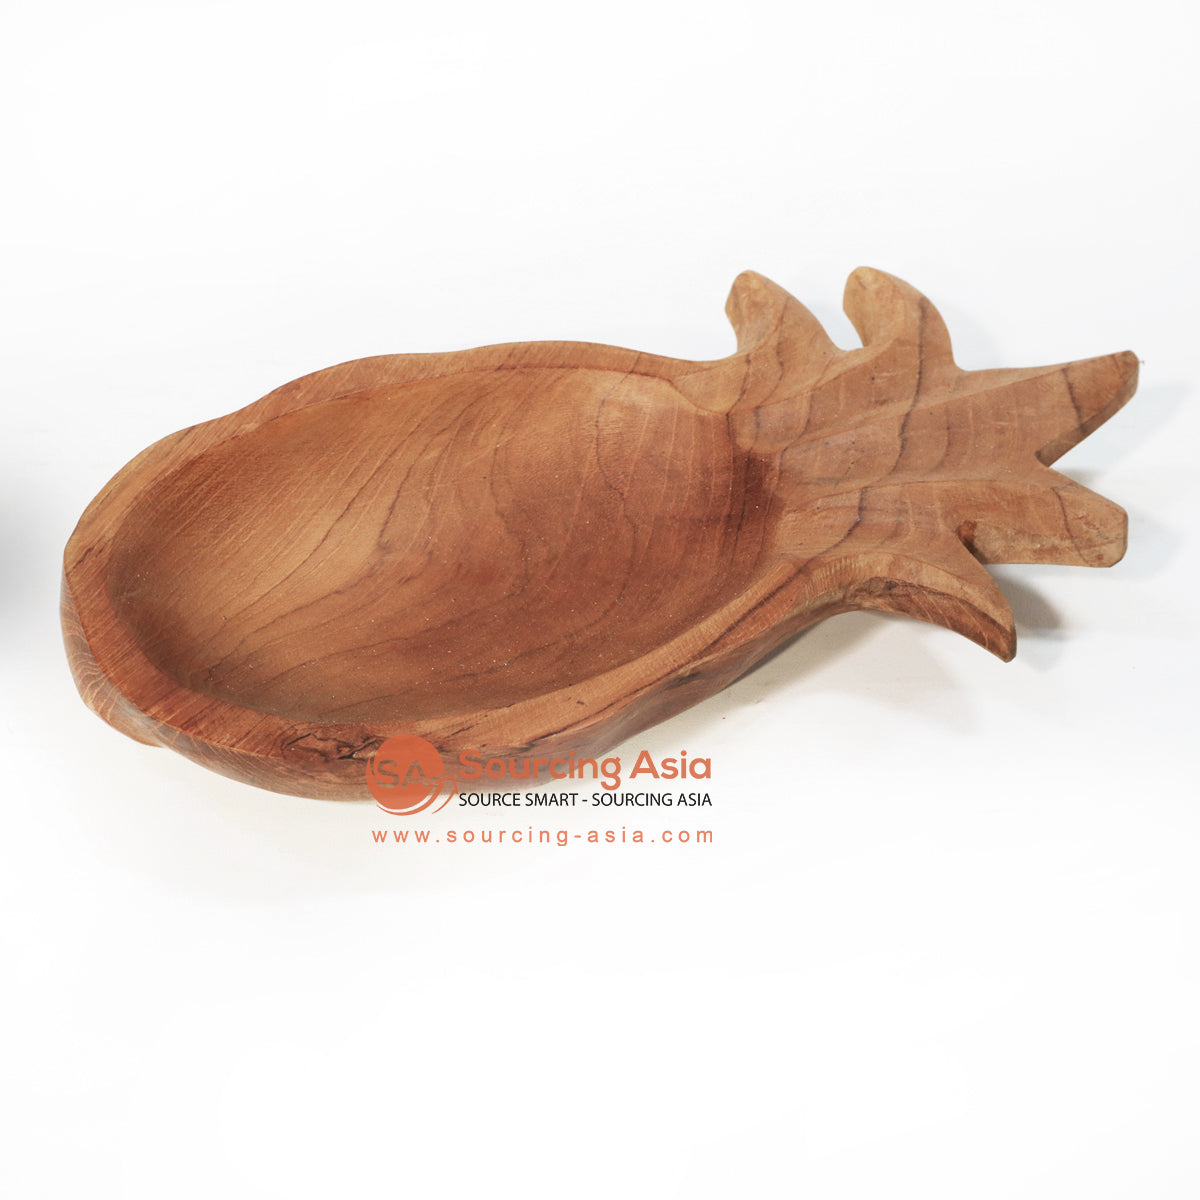 BMWC002 NATURAL WOODEN PINEAPPLE SNACK BOWL